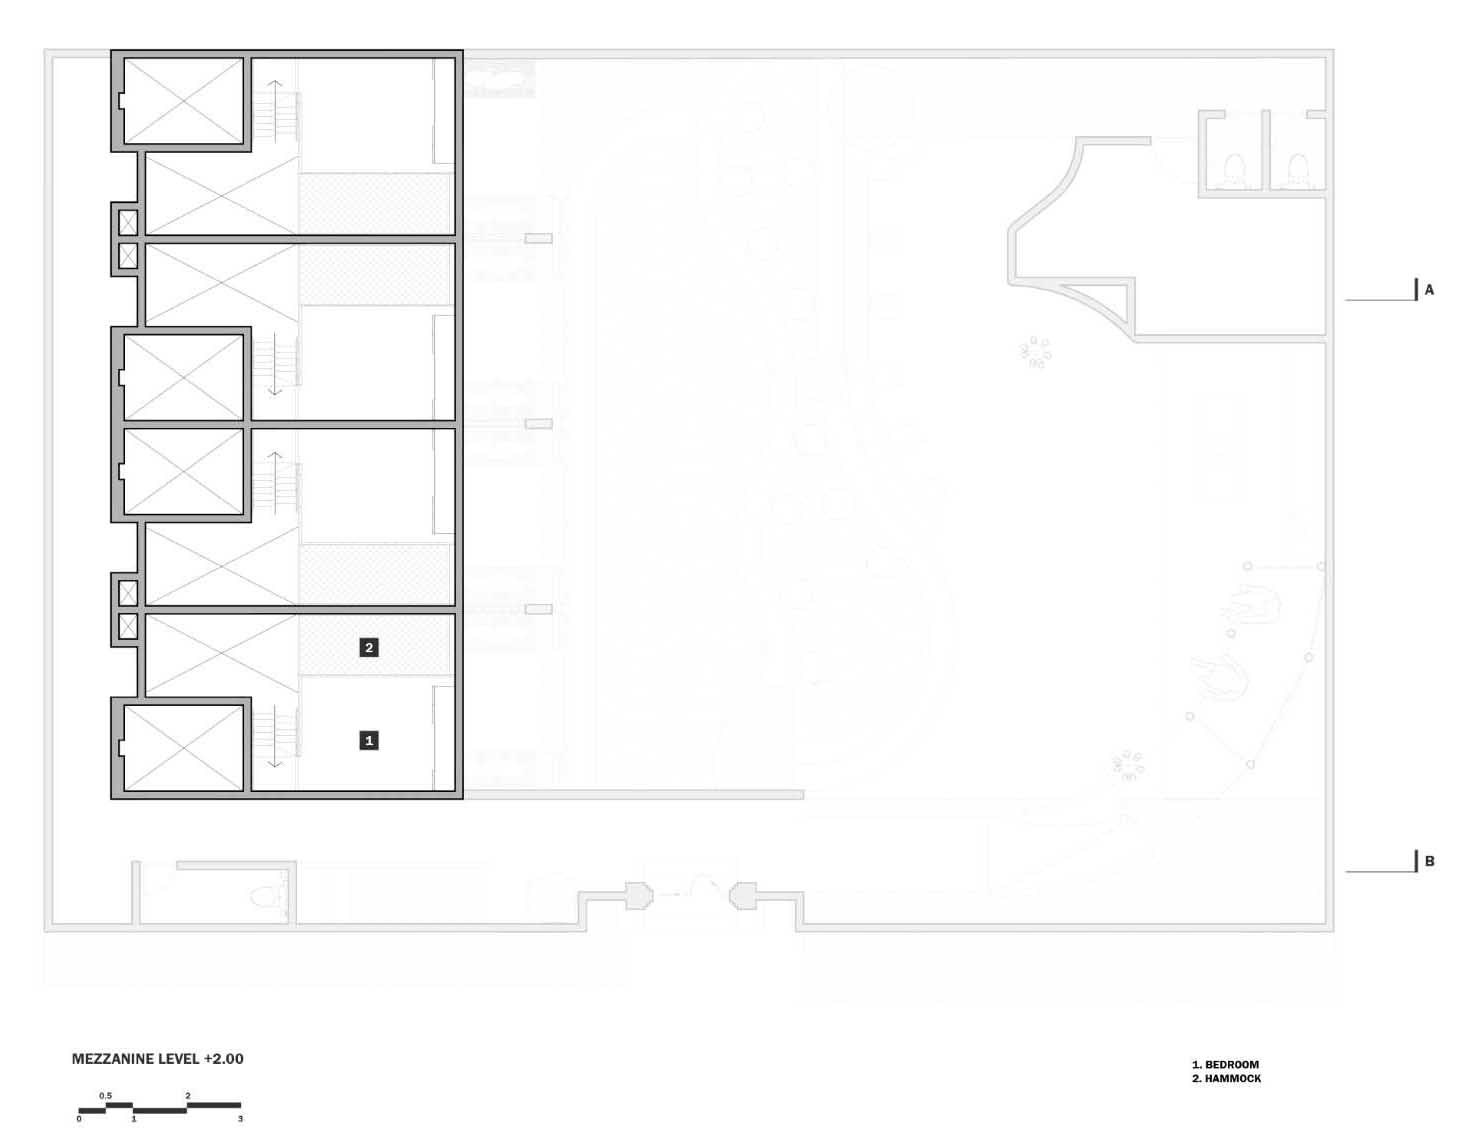 The mezzanine plan for a micro-living property.